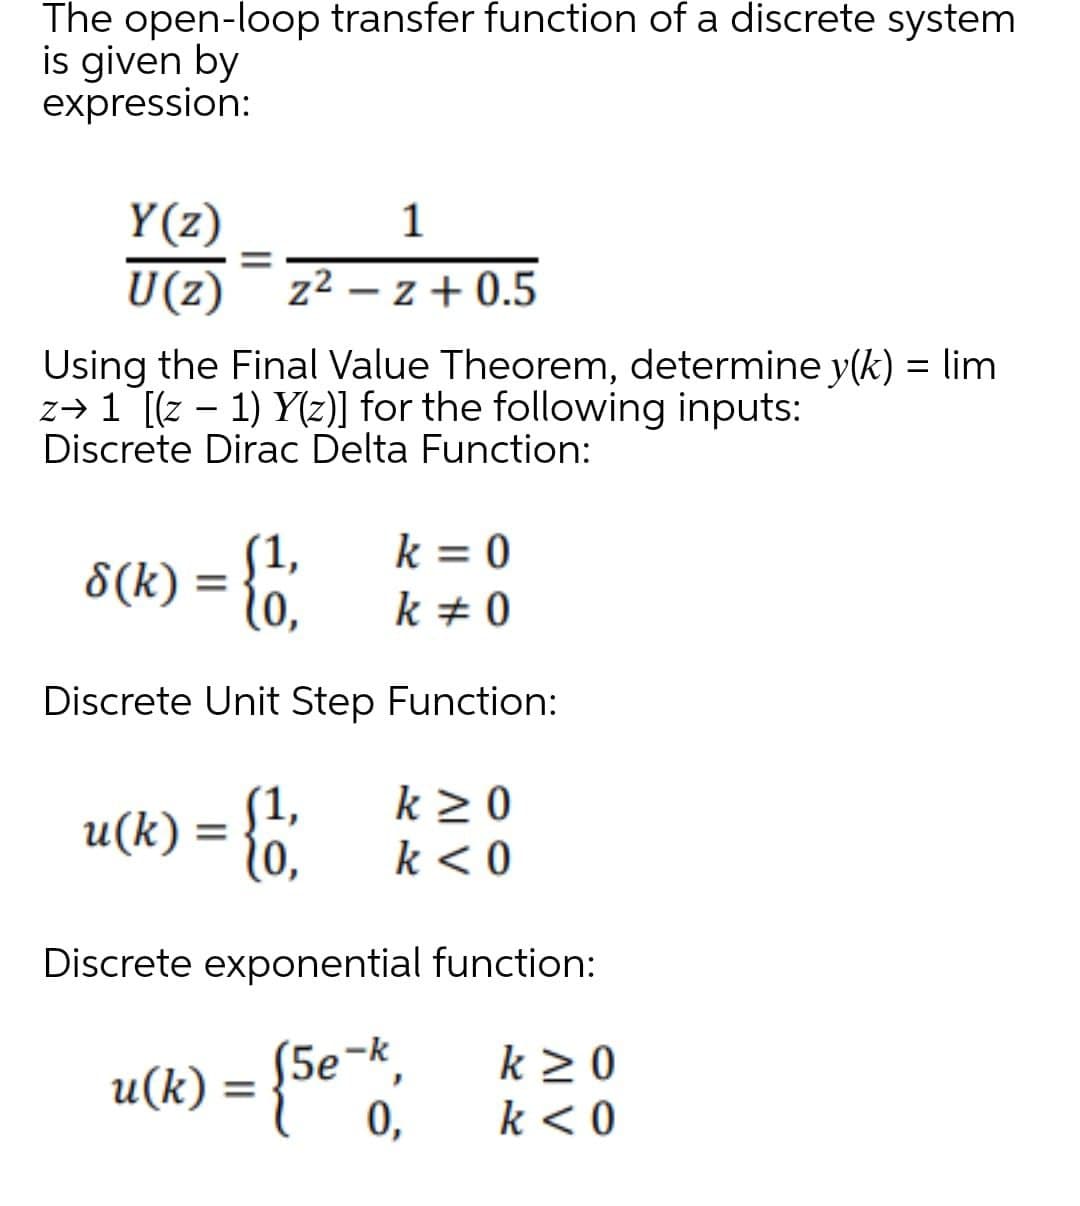 The open-loop transfer function of a discrete system
is given by
expression:
Y(z)
1
=
U(z) z² - z+0.5
Using the Final Value Theorem, determine y(k) = lim
z→ 1 [(z − 1) Y(z)] for the following inputs:
Discrete Dirac Delta Function:
k = 0
k # 0
Discrete Unit Step Function:
8(k):
u(k)
=
(1,
=
(1,
10,
k≥0
k < 0
Discrete exponential function:
(5e-k,
k≥ 0
0,
k <0
u(k) -